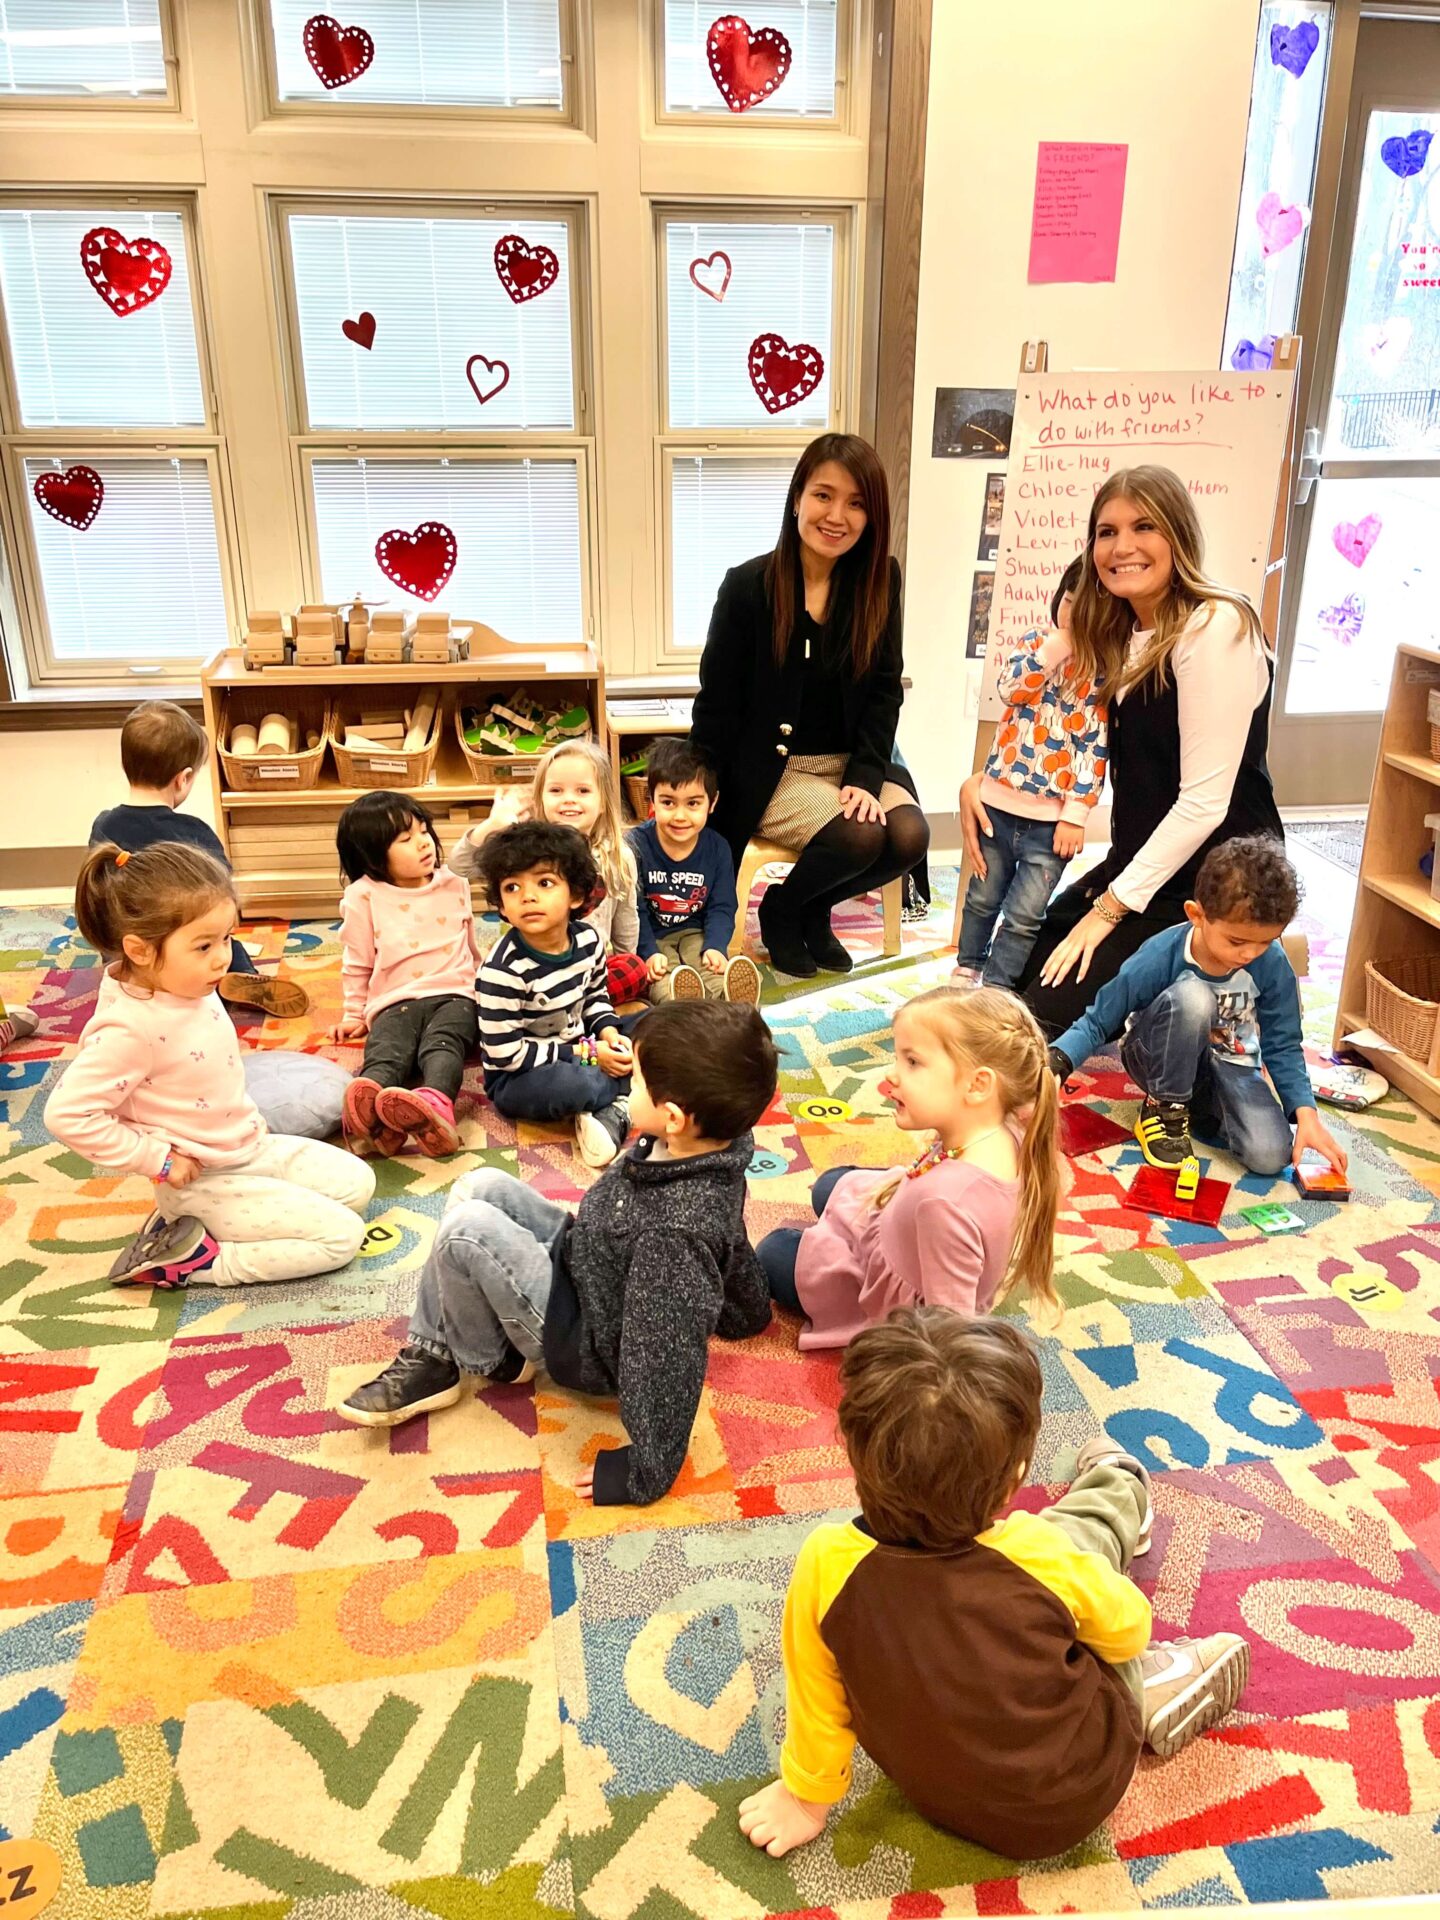 I had an amazing time engaging with the two-year-old classroom at ECEC. Their smiles and laughter warmed my heart.